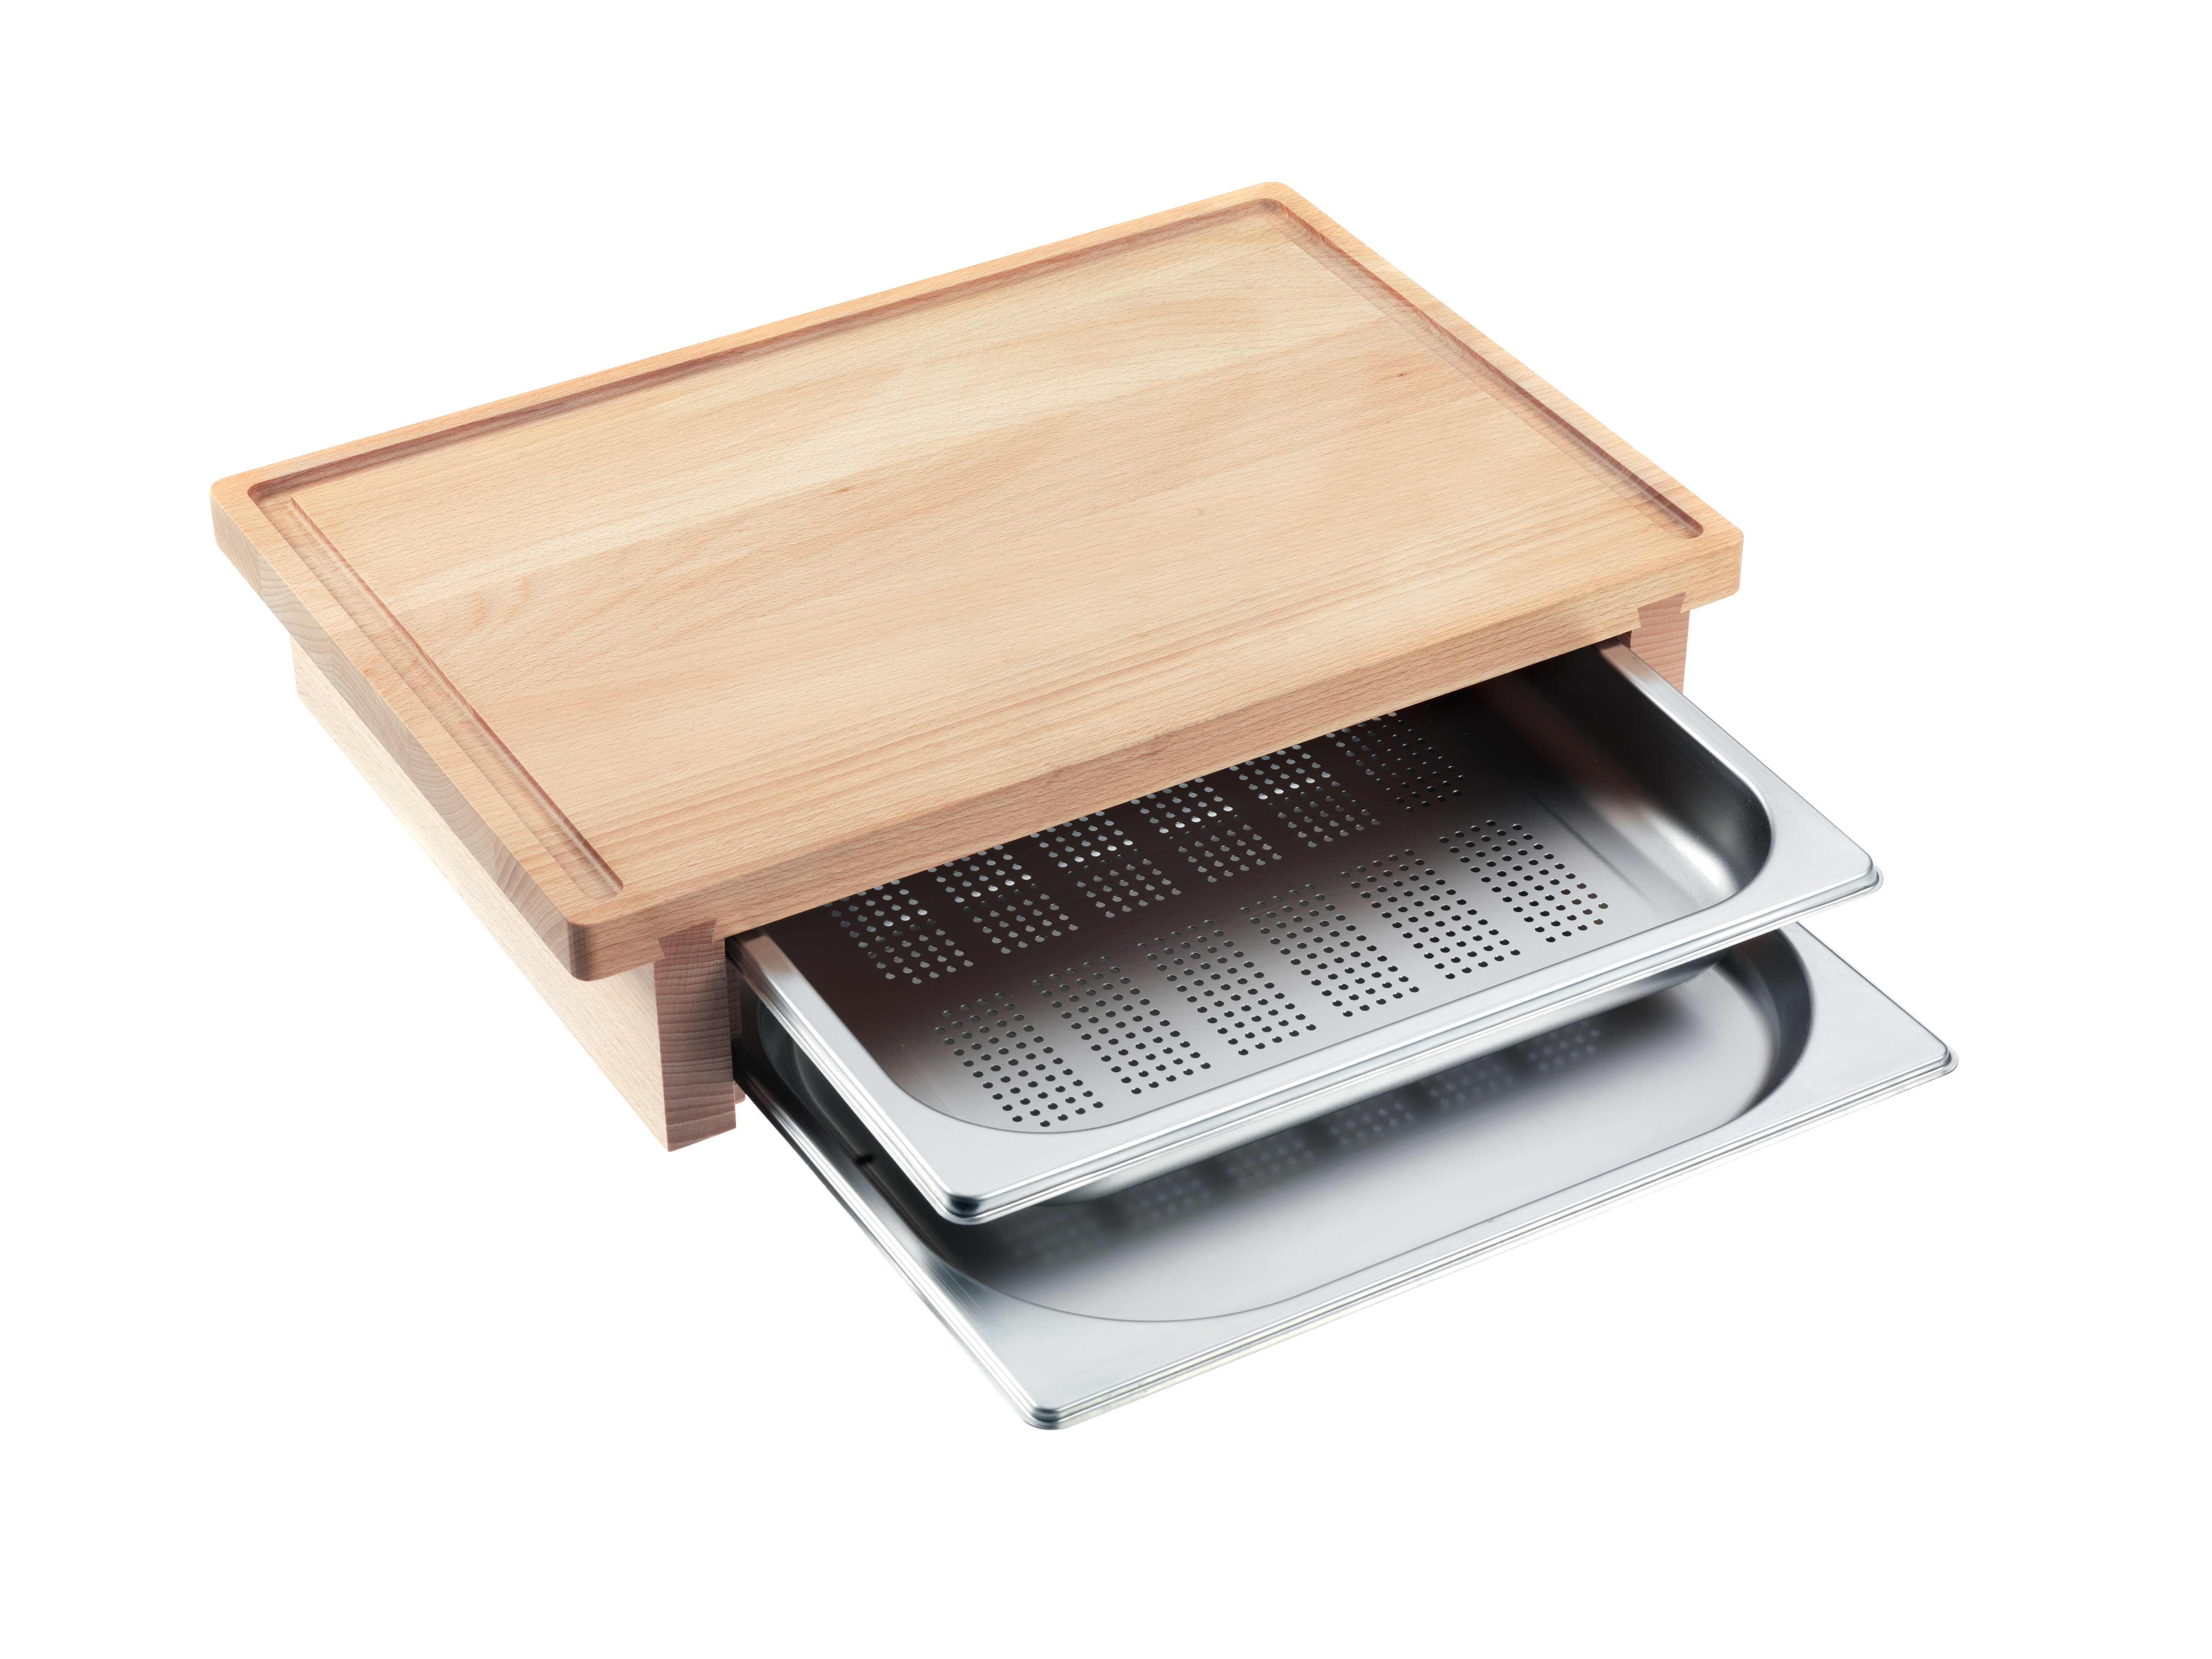 DGSB 1Cutting board with 2 inserted steam cooking containers.